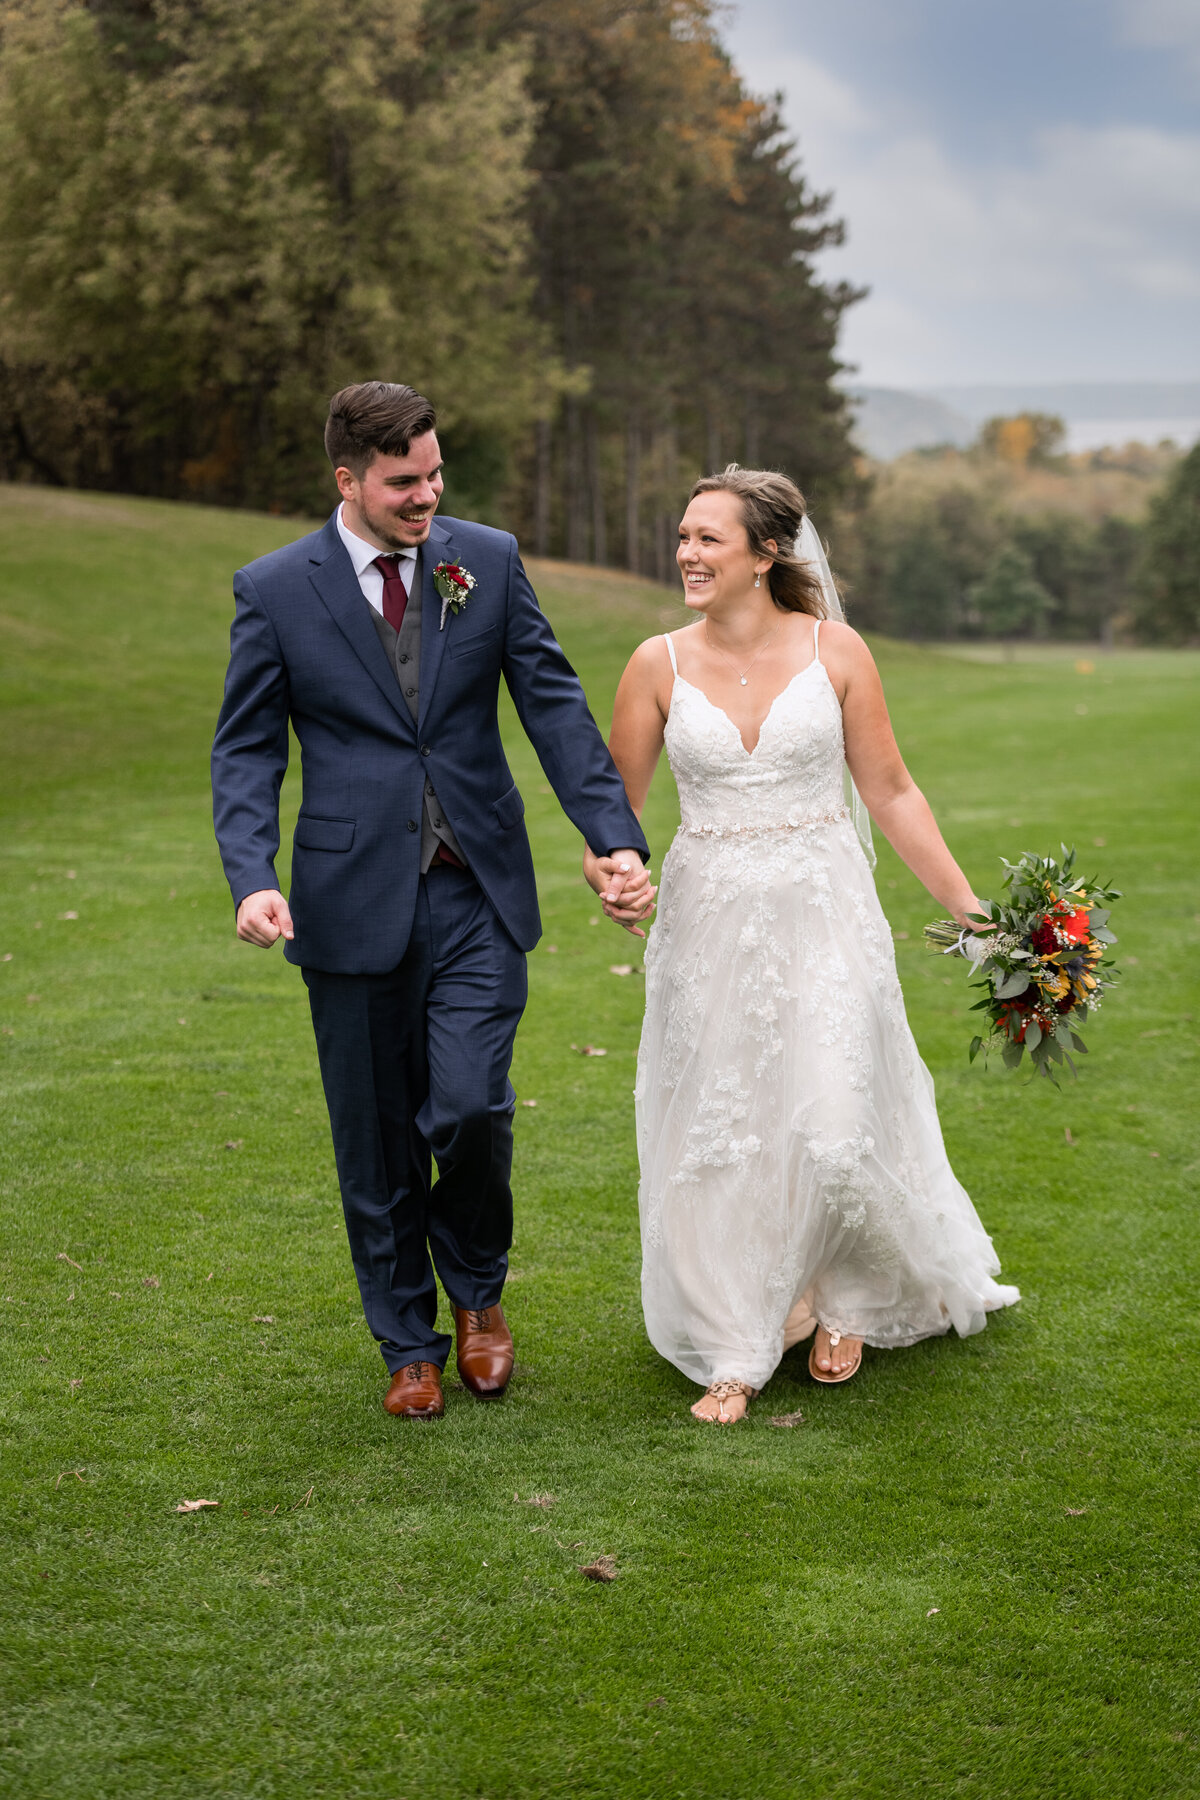 Wedding couple smiling and walking on a golf course